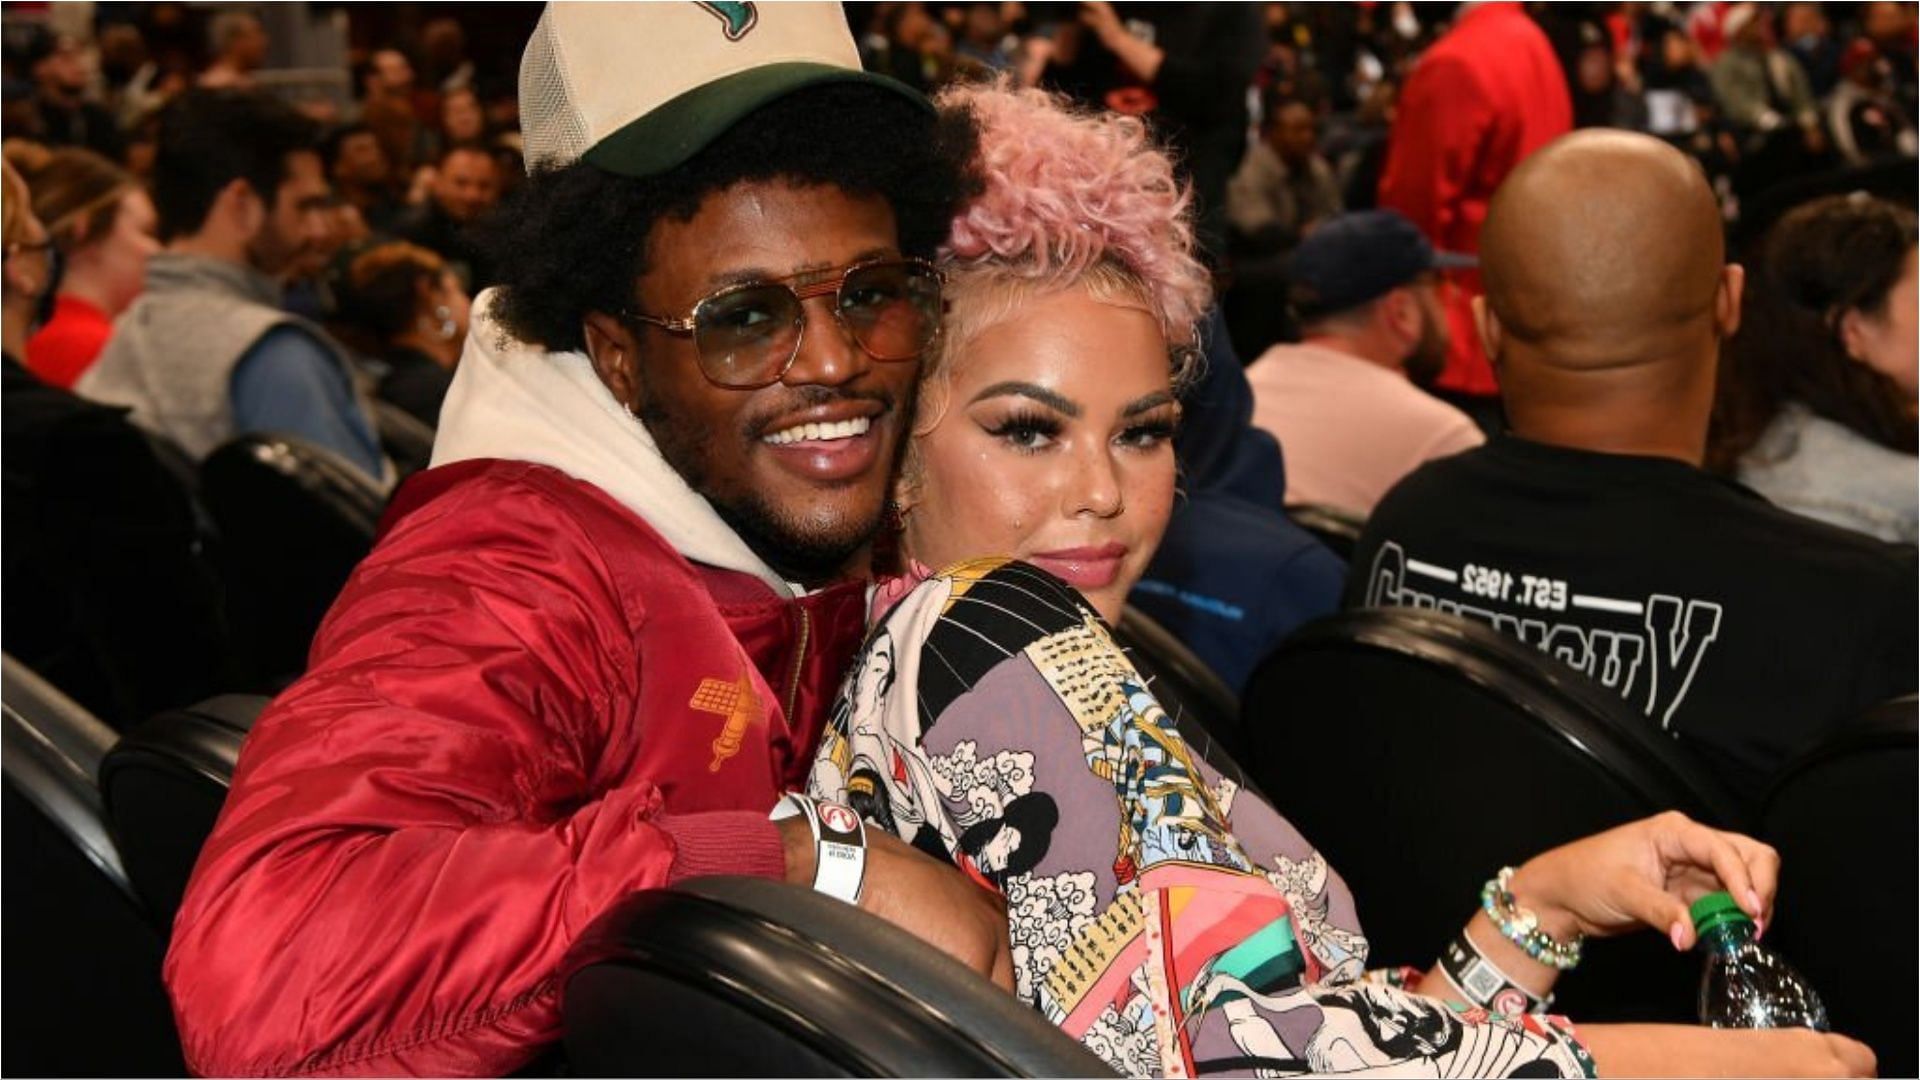 Jacky Oh and DC Young Fly were in a relationship since 2015 (Image via Paras Griffin/Getty Images)